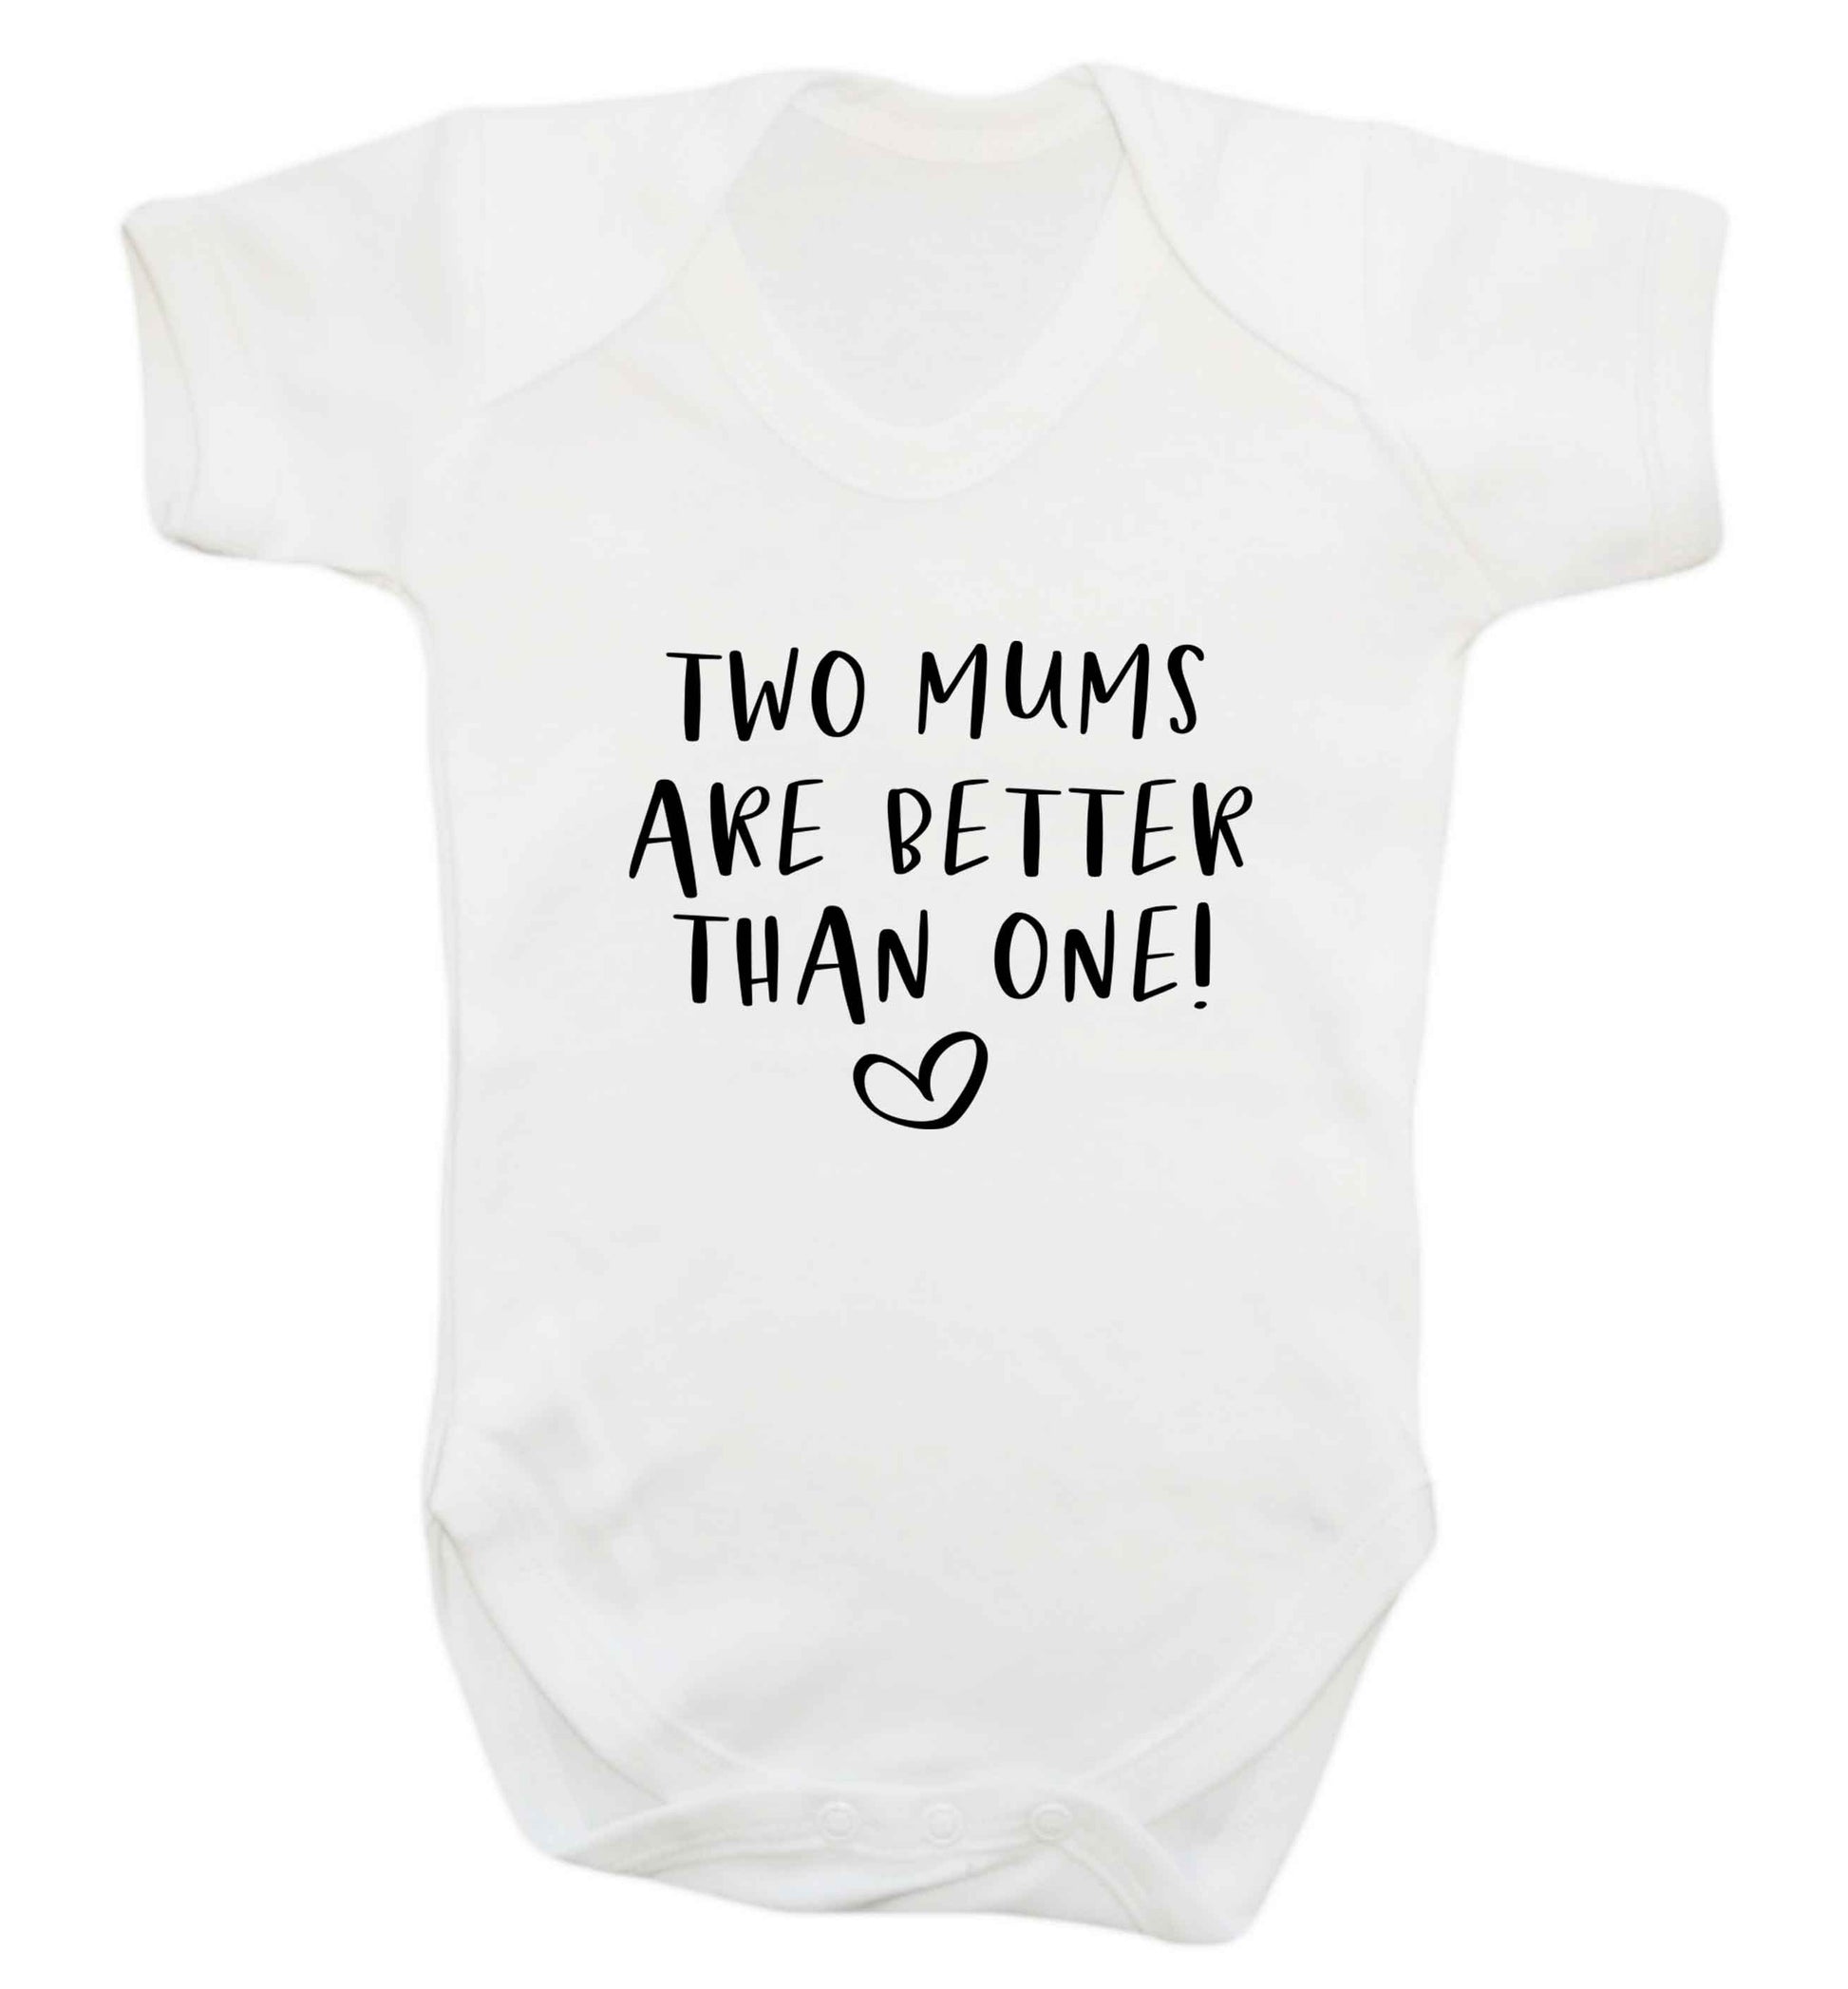 Two mums are better than one baby vest white 18-24 months